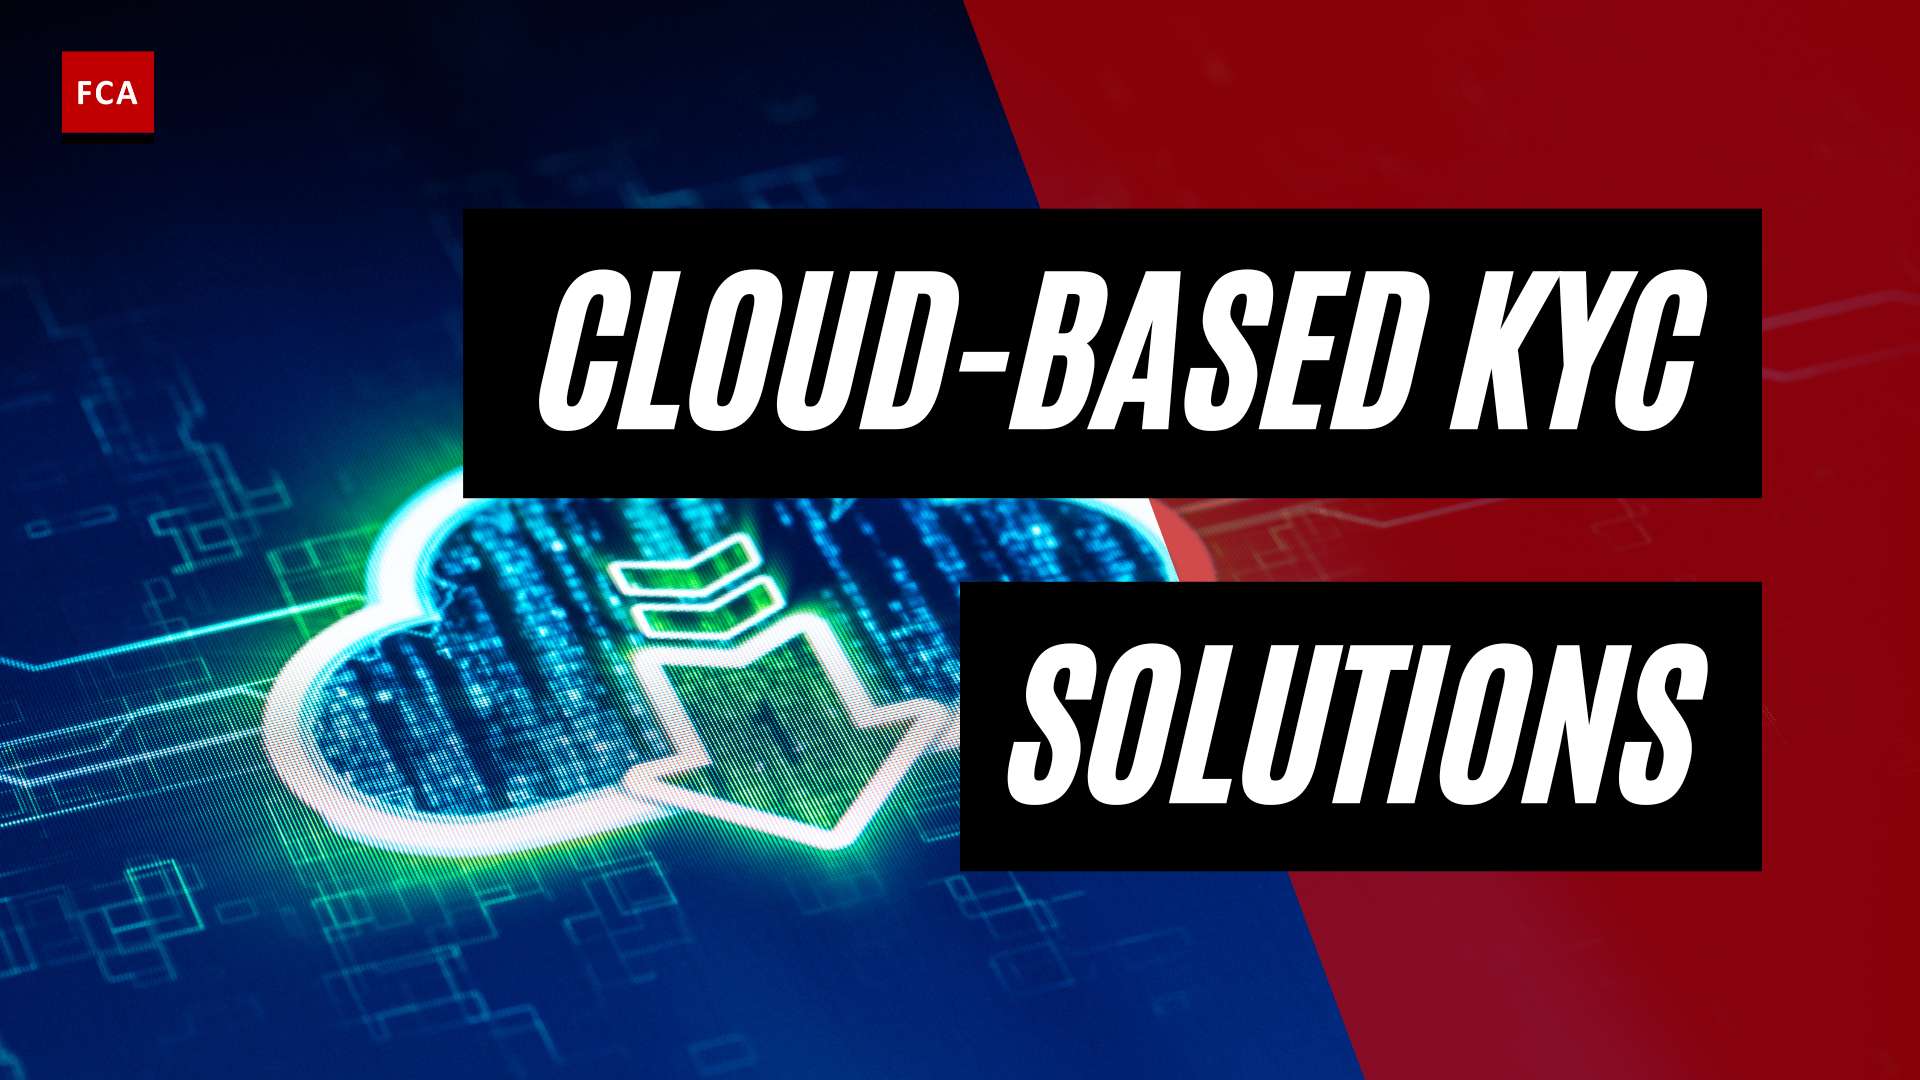 Breaking Boundaries: Cloud-Based Kyc Solutions For Aml Compliance